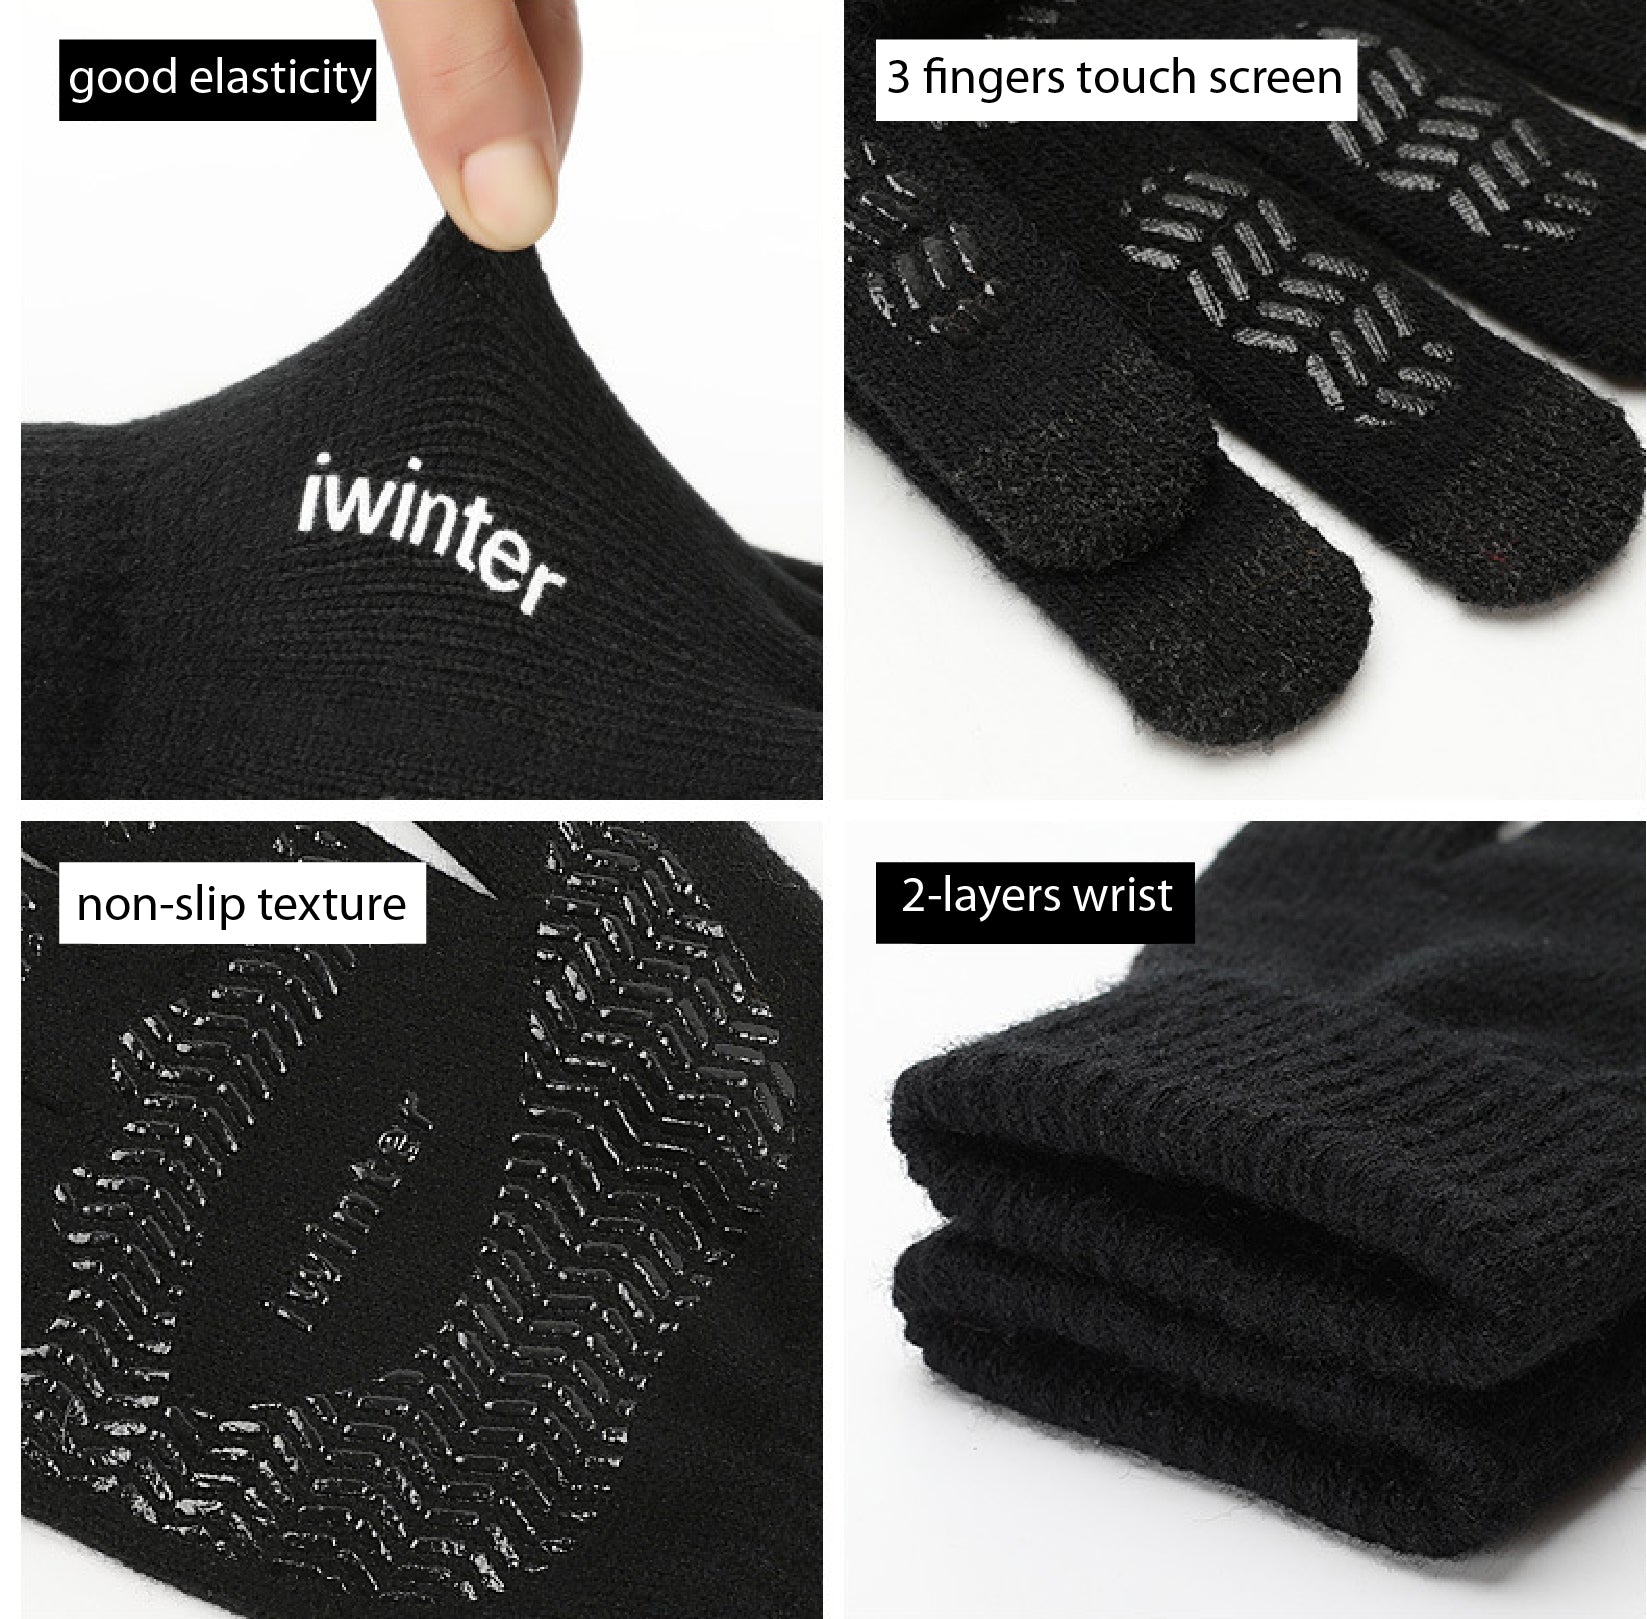 TouchScreen Winter Non-slip Knitting Gloves for outdoor activities, war games, bicycle, motorbike...